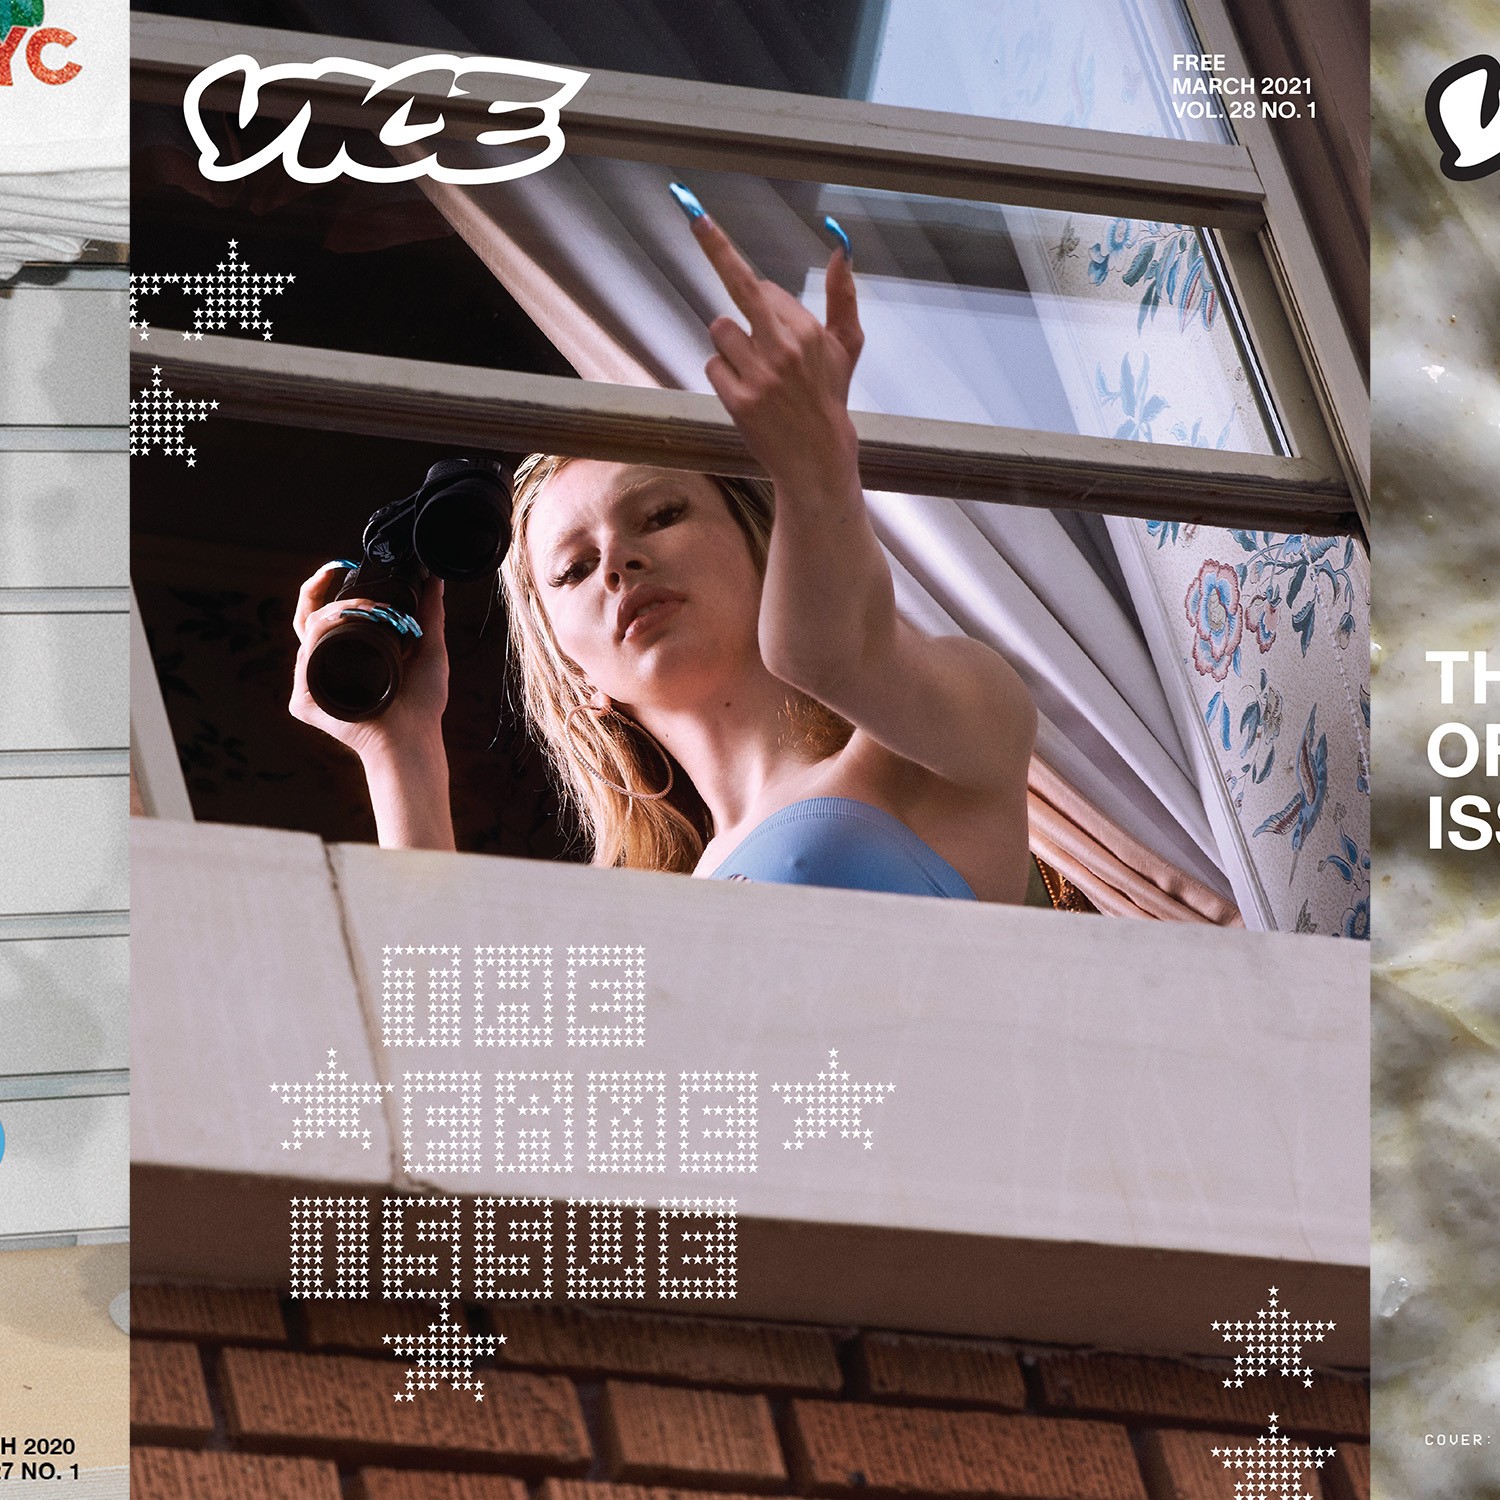 How to Subscribe to VICE Magazine (and Get the Fame Issue)